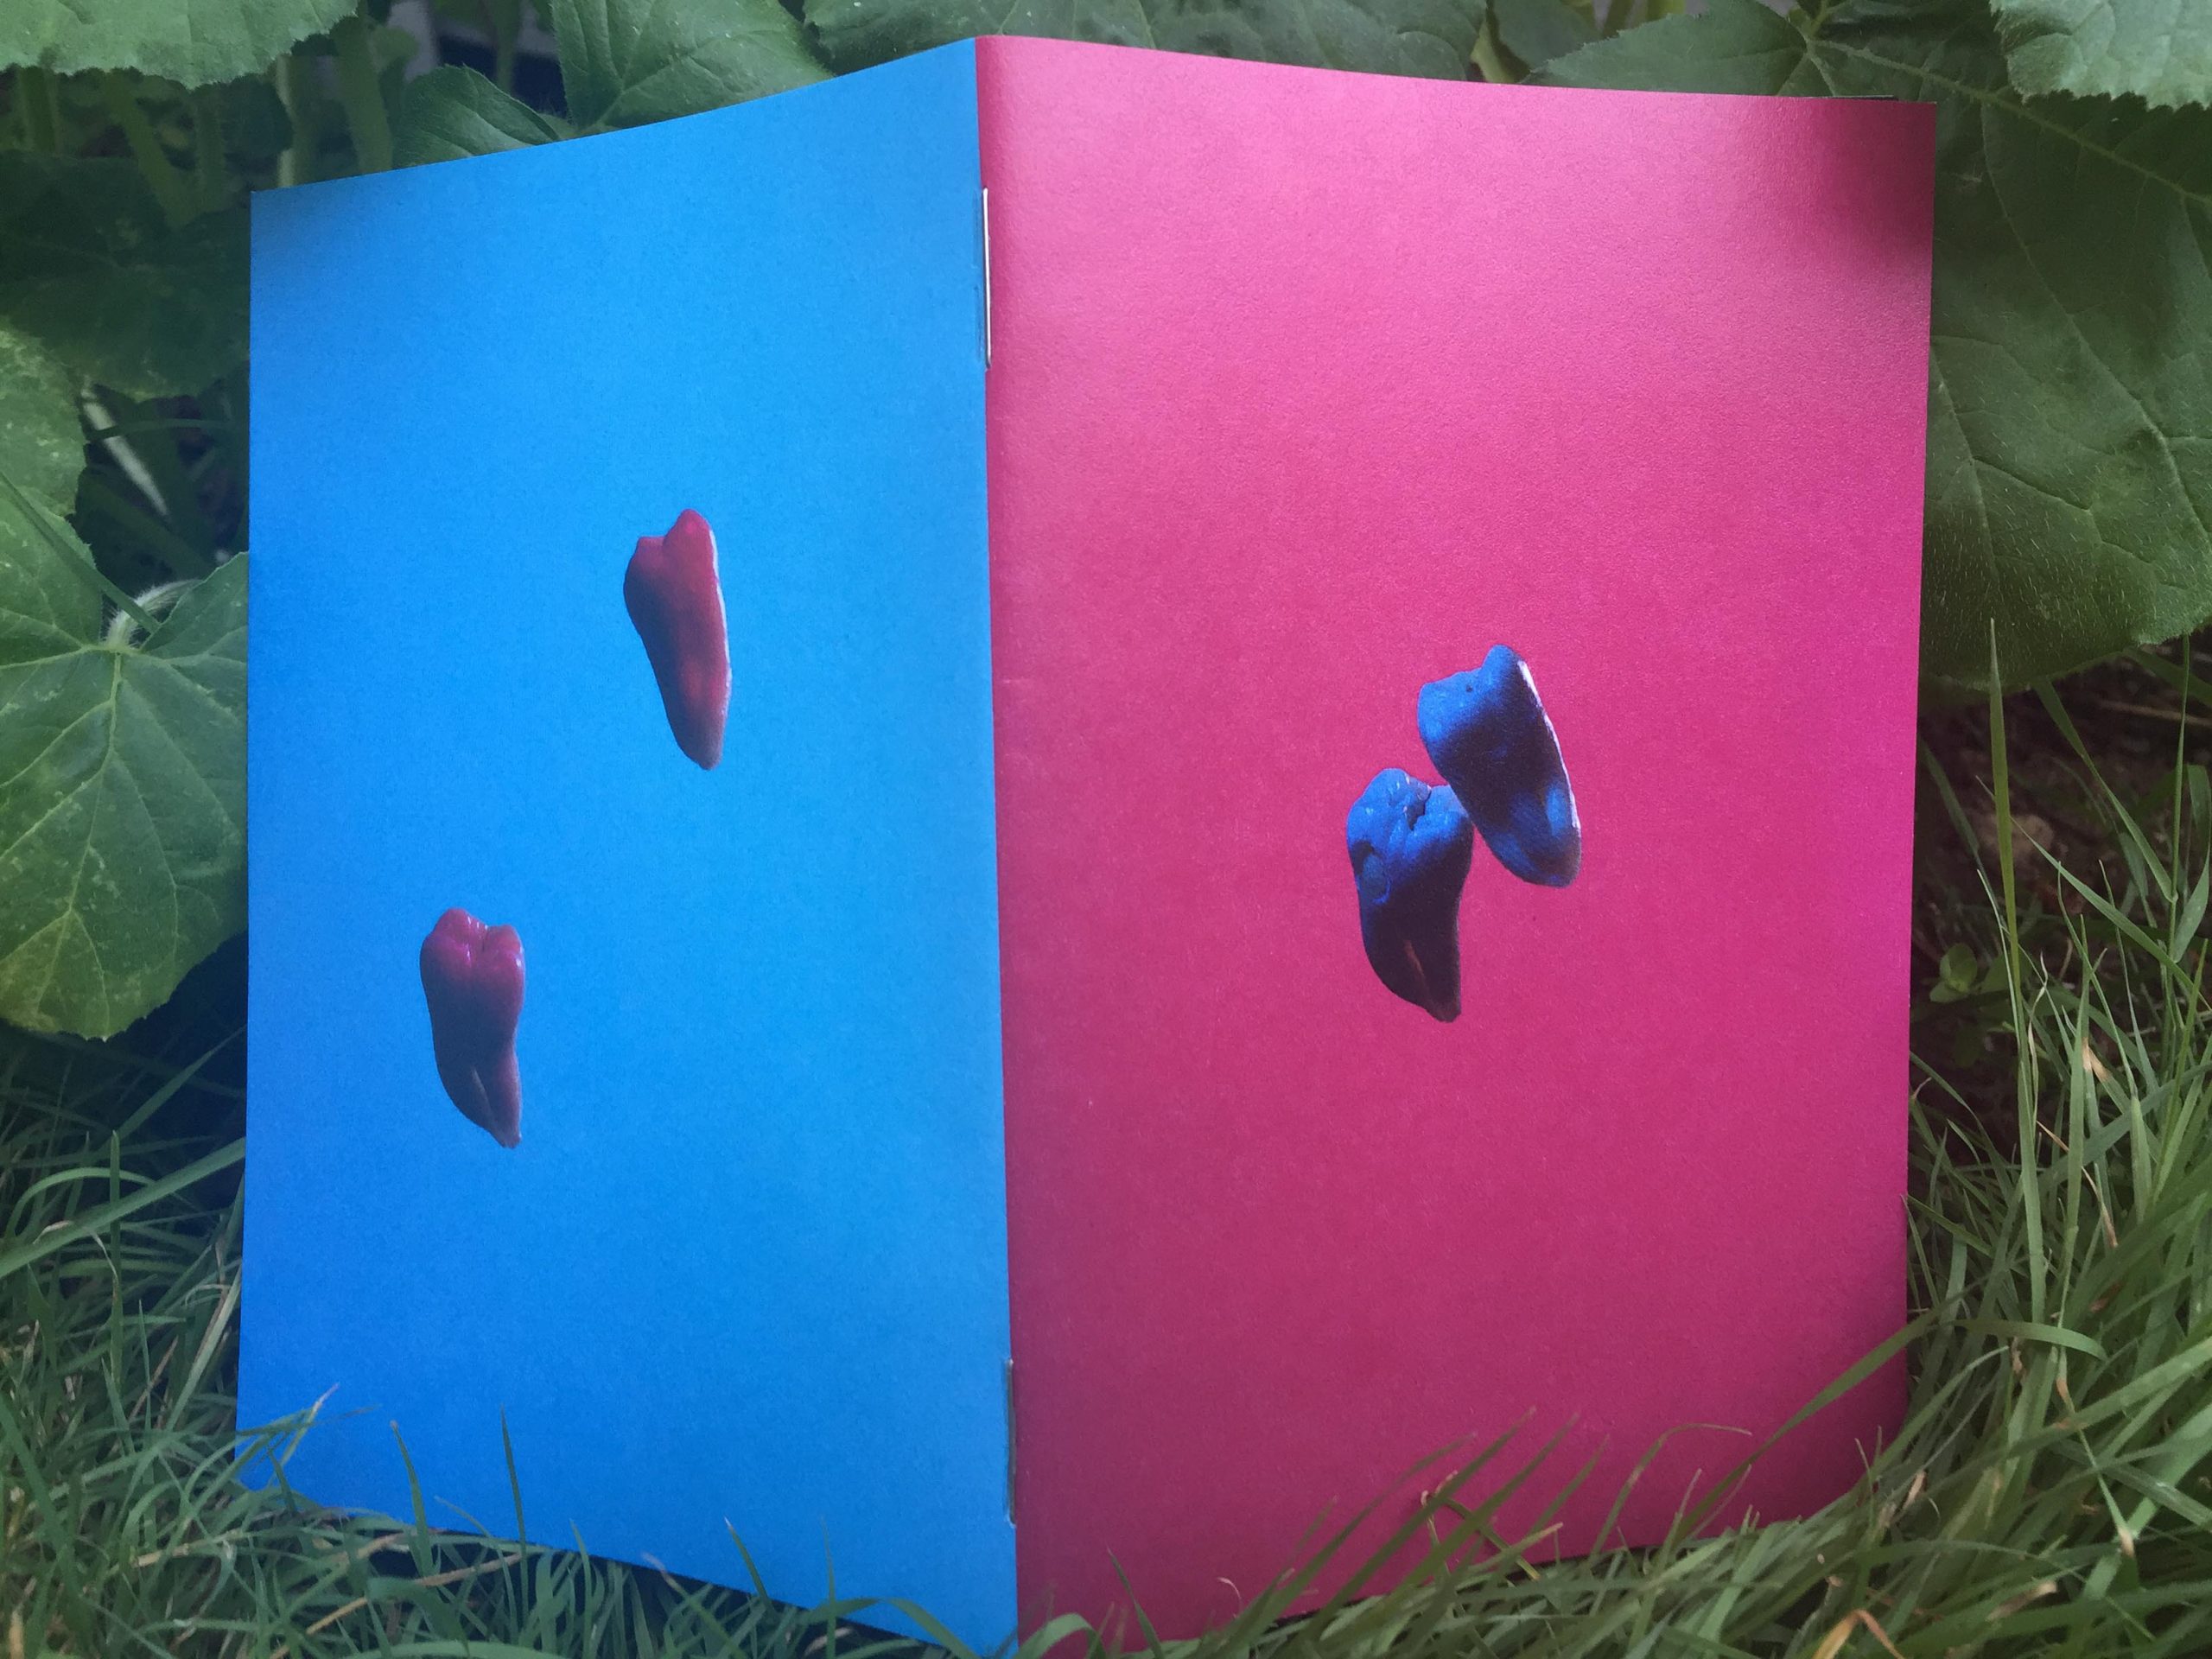 A paper zine stands open, with the front and back covers facing the viewer. The cover to the left has a deep blue background with two teeth, wisdom teeth, in the centre. The teeth are highlighted with contrasting magenta light. The cover to the right has a deep magenta background with two teeth, wisdom teeth, in the centre. The teeth are highlighted with contrasting blue light. One tooth has a large chip just below the crown. The zine stands on vibrant green grass. Squash leaves peek out from behind the covers.